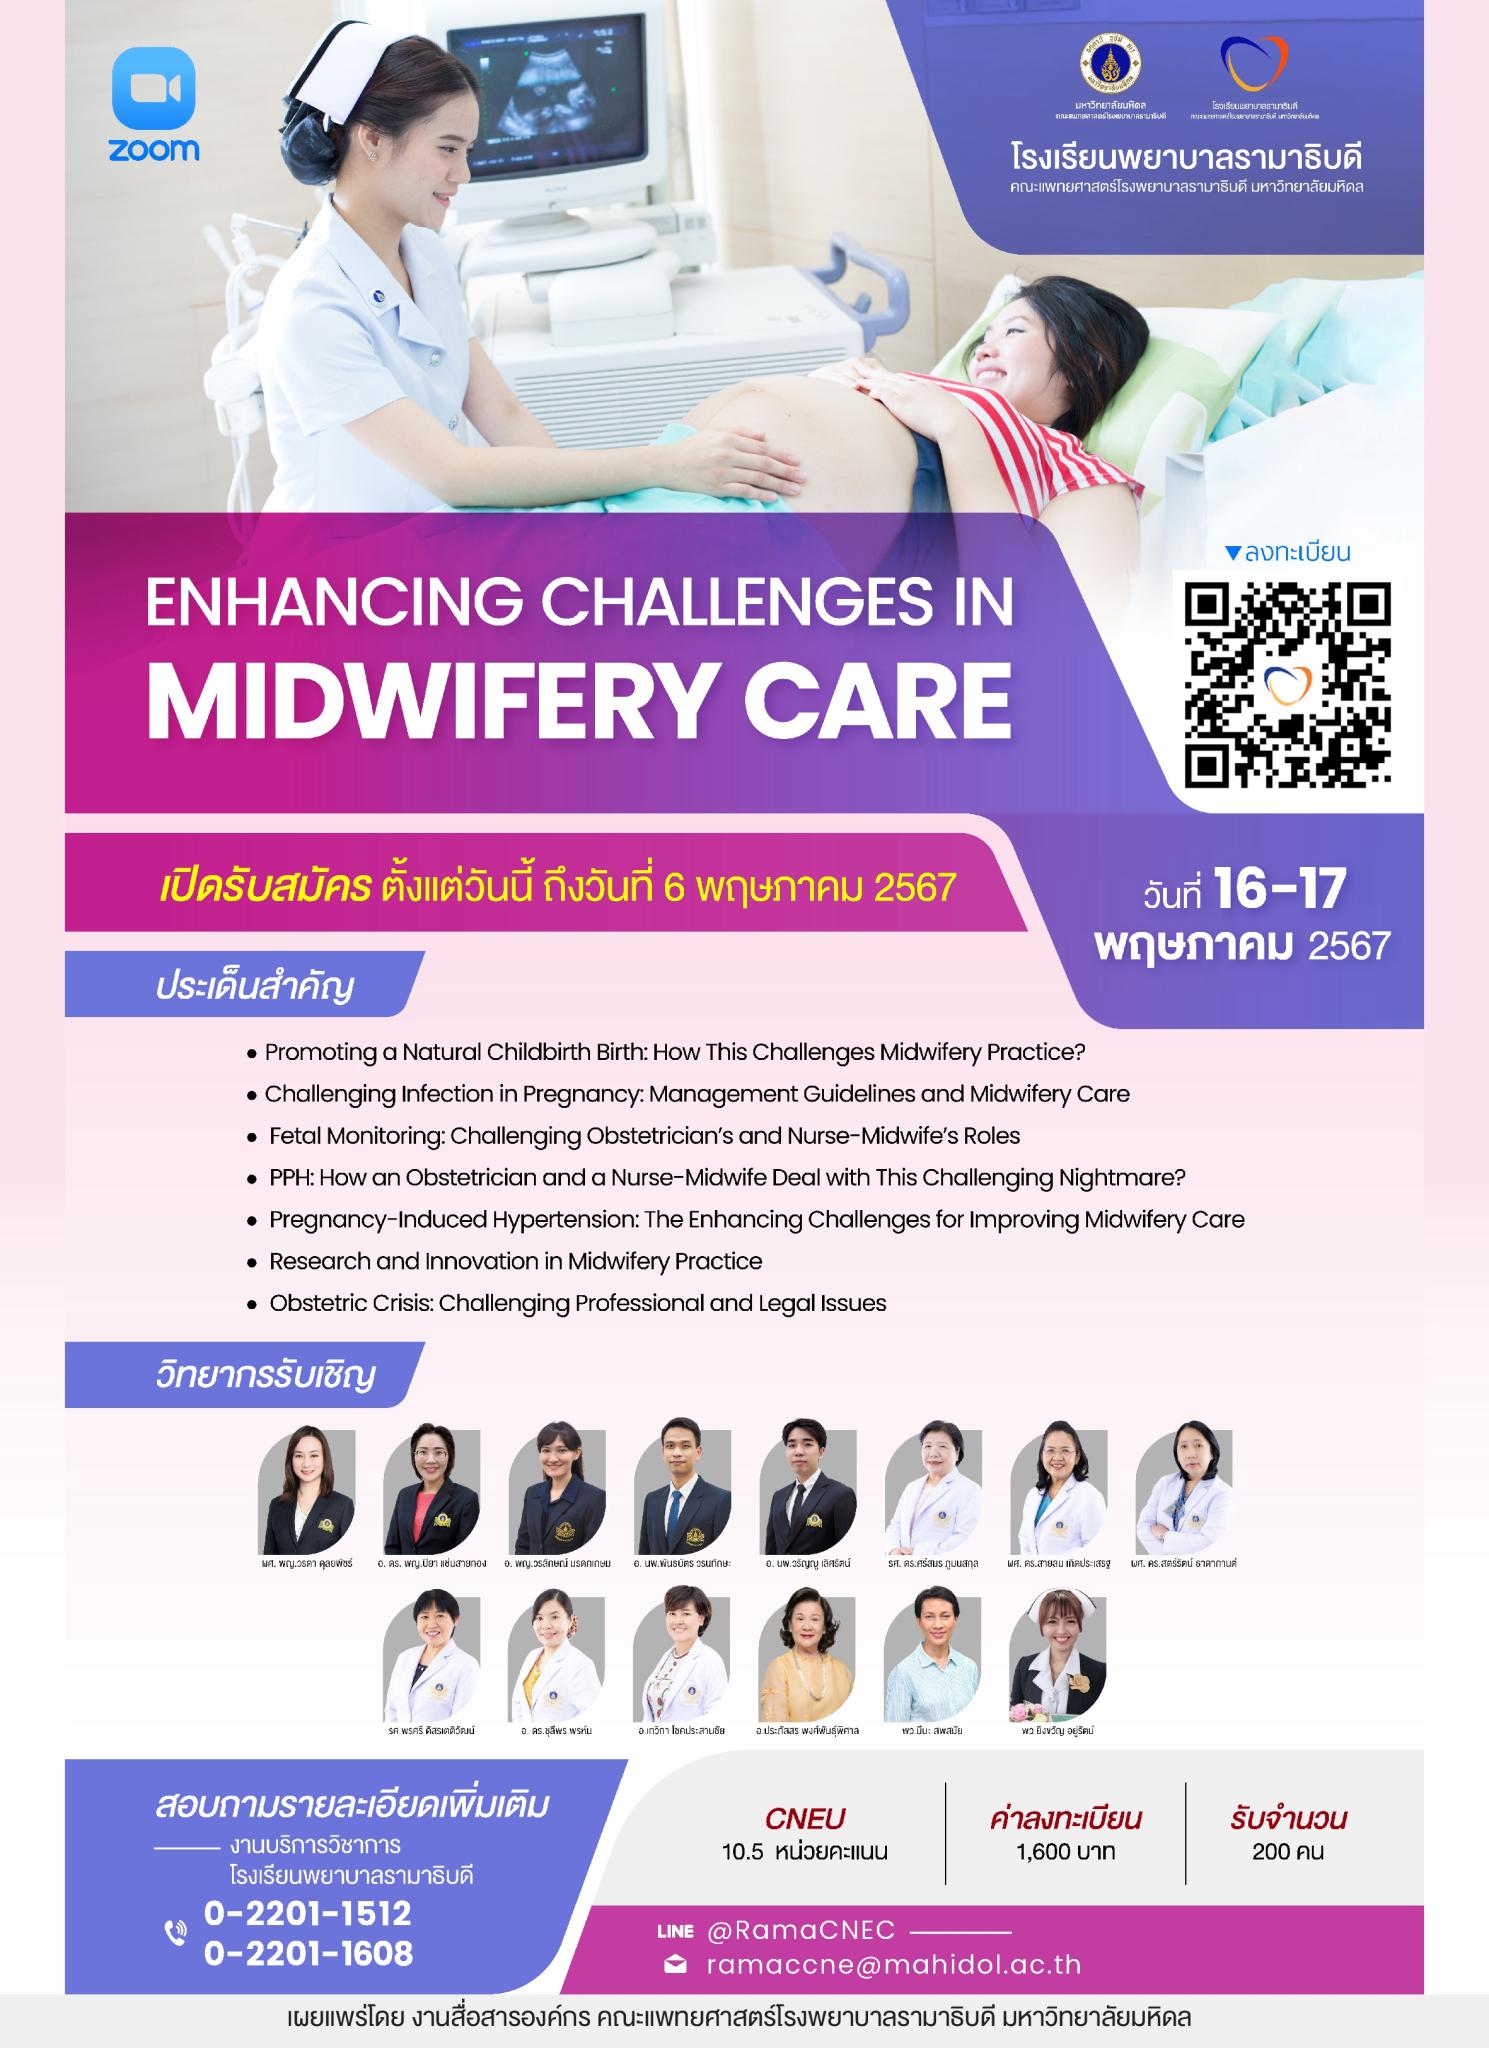 ENHANCING CHALLENGES IN MIDWIFERY CARE